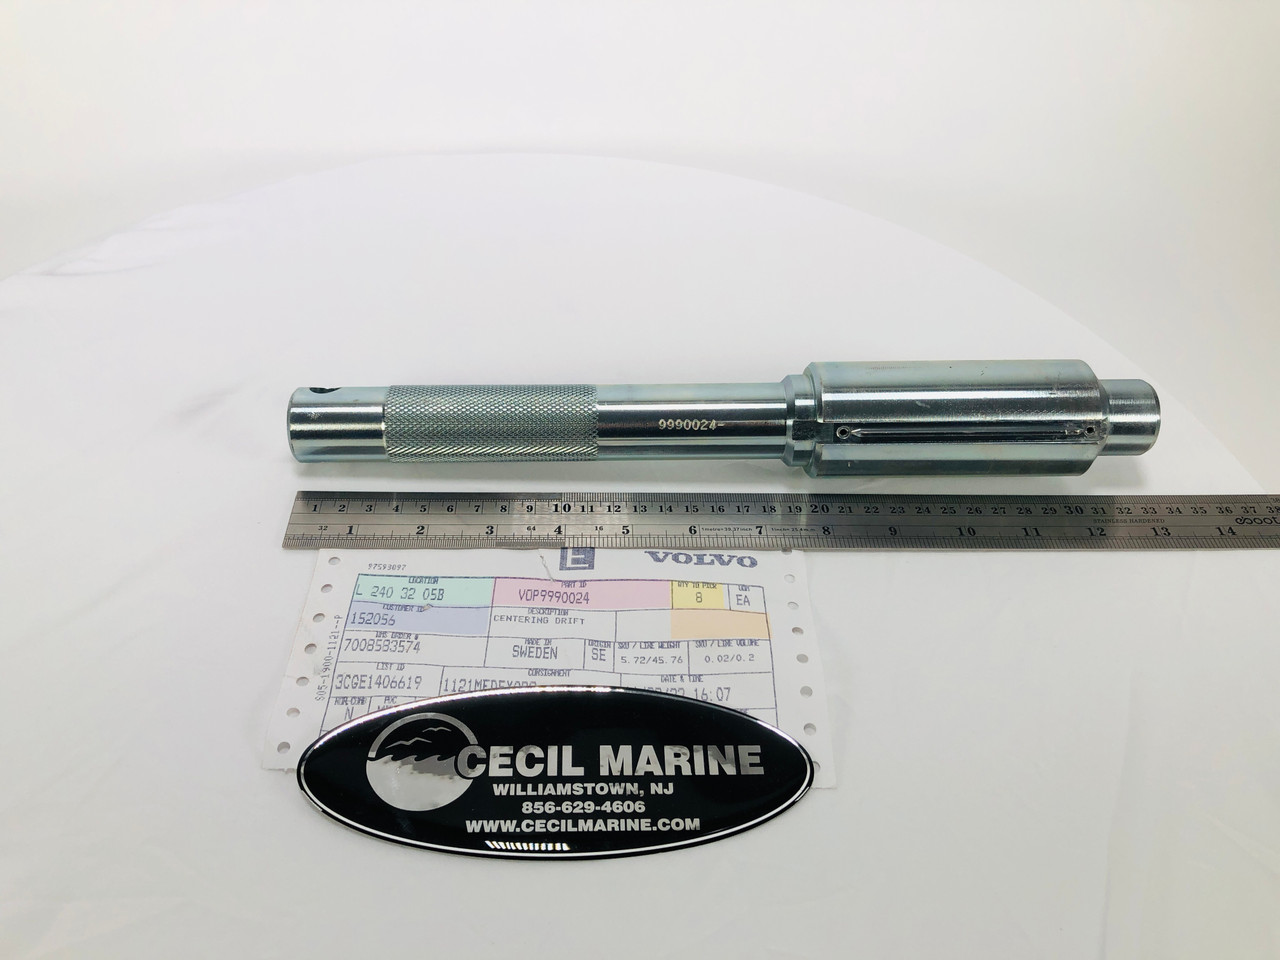 $379.99* GENUINE VOLVO no tax* CENTERING PRESS TOOL 9990024 *In Stock & Ready To Ship!